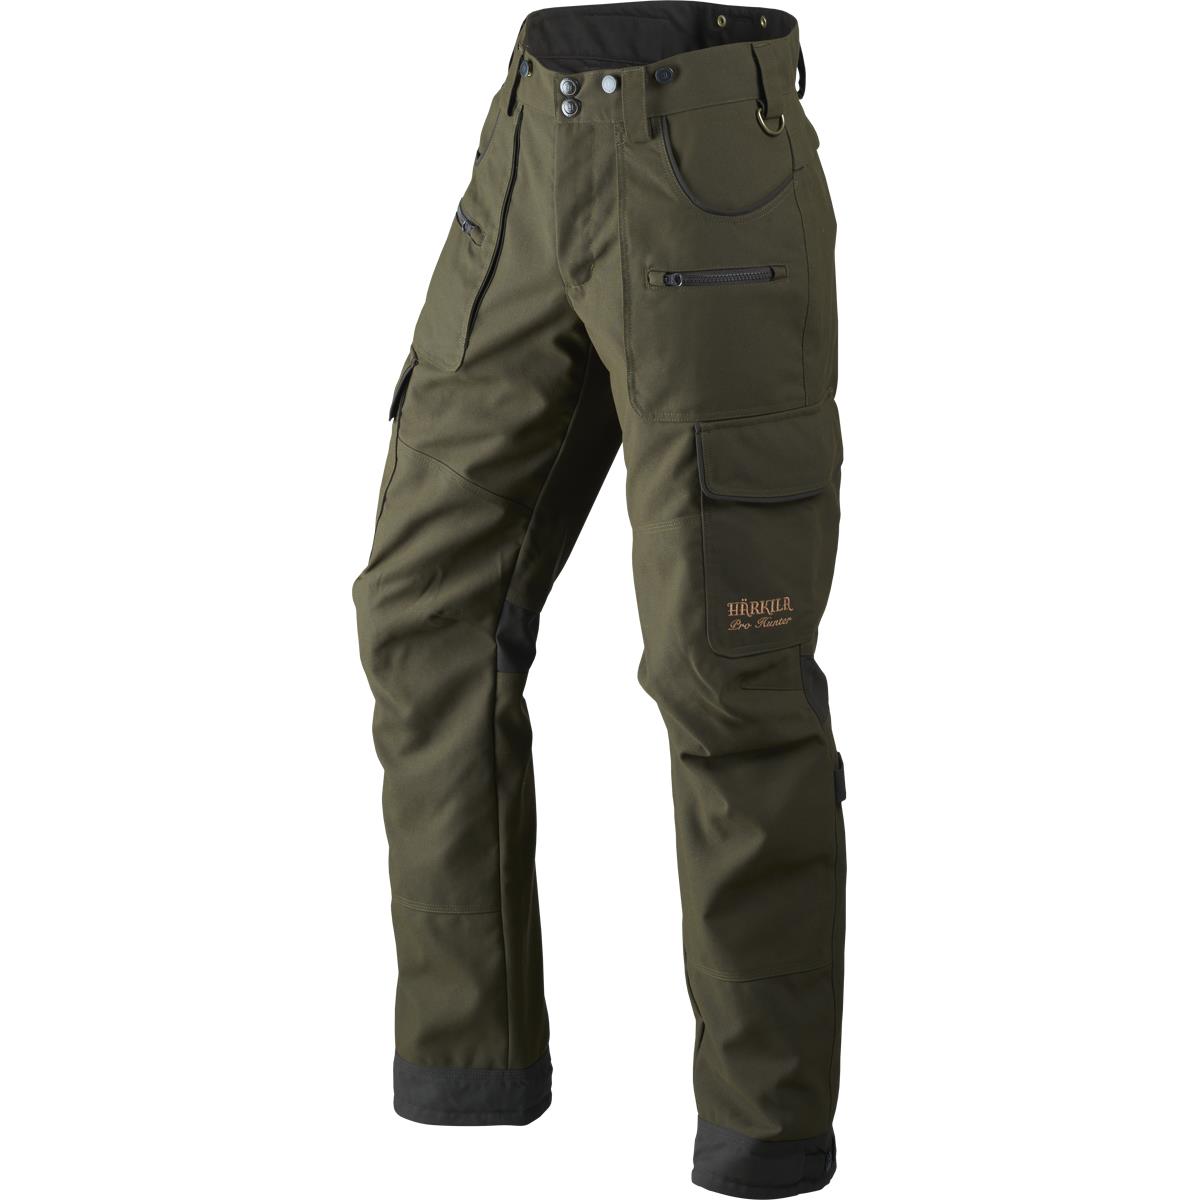 What sizes & colors of Harkila Pro Hunter trousers are offered?